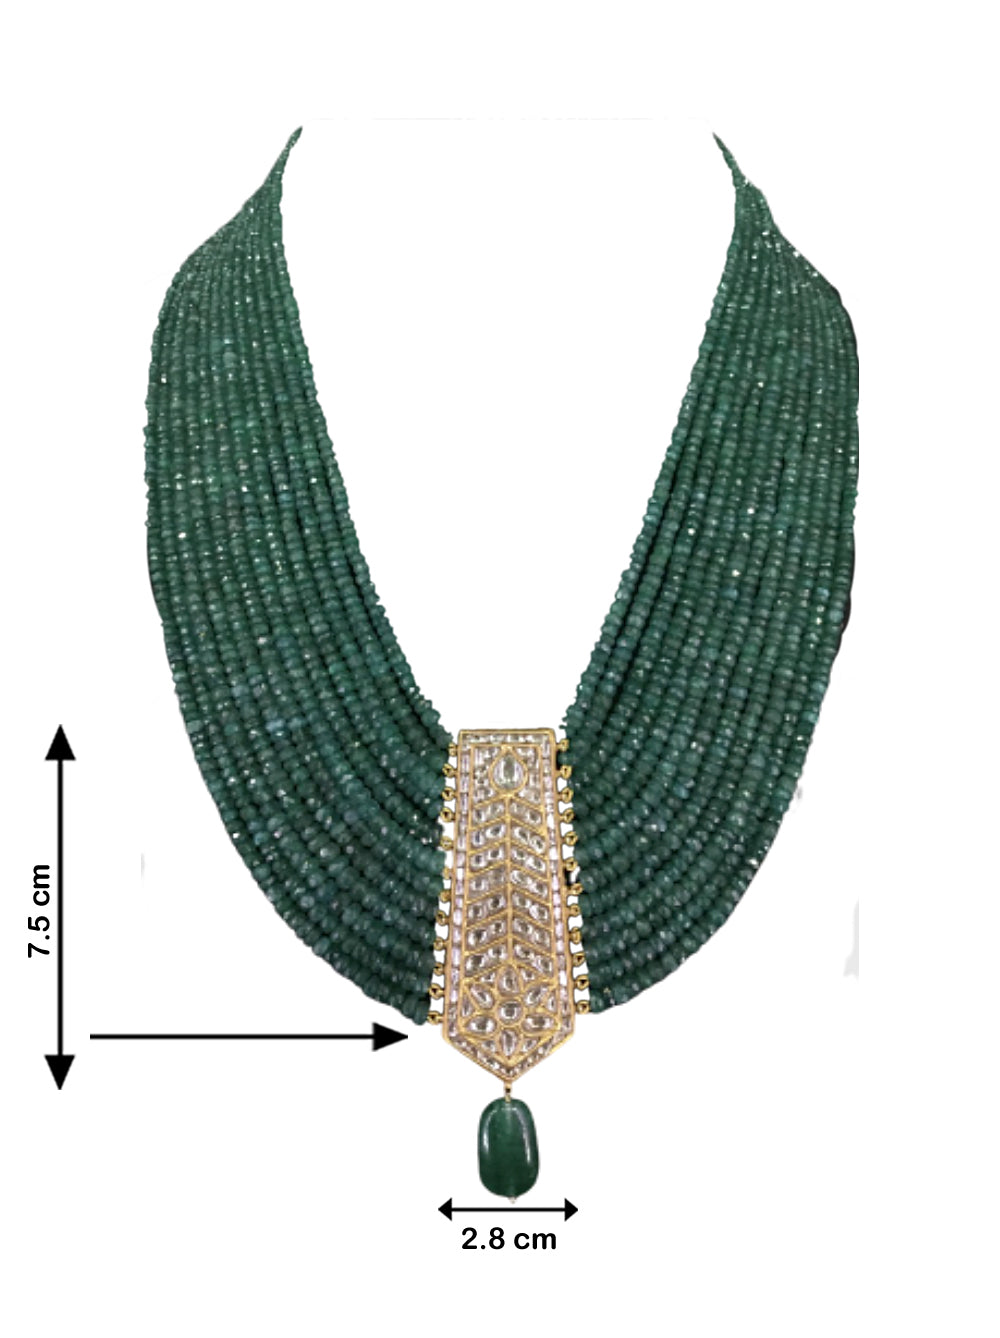 23k Gold and Diamond Polki tie-shaped Pendant with Green Beryls